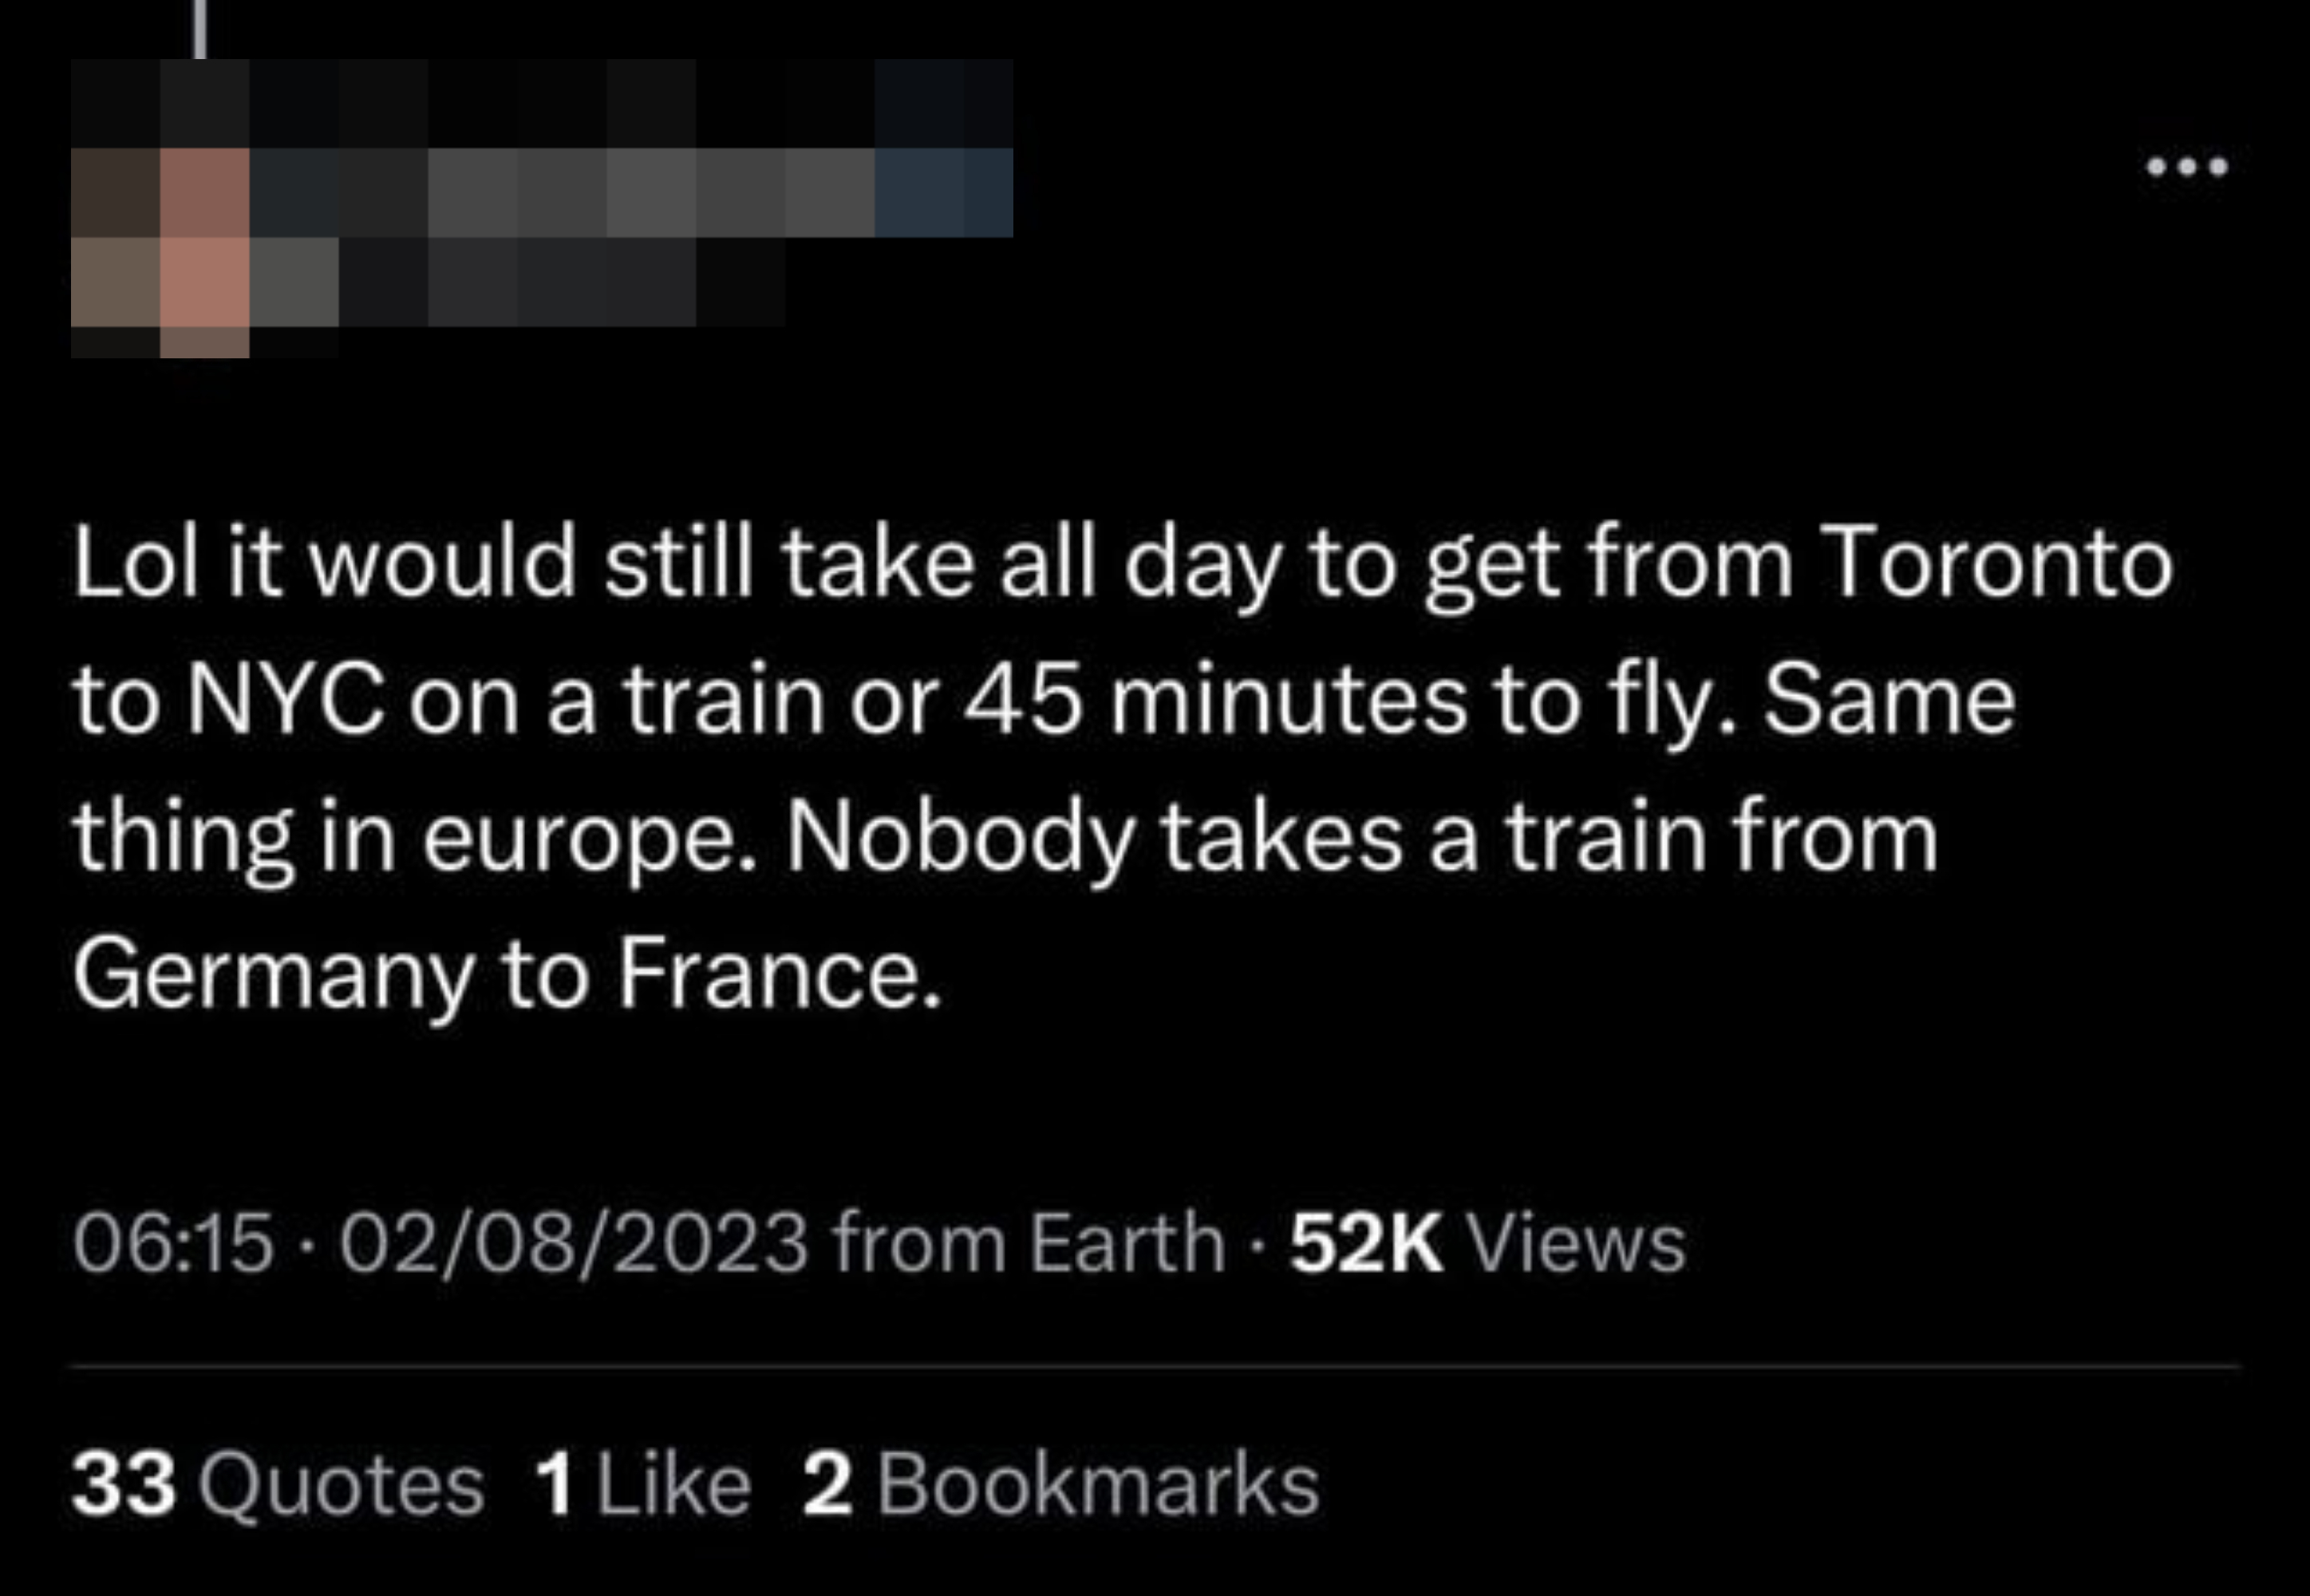 &quot;Lol it would still take all day to get from Toronto to NYC on a train or 45 minutes to fly.&quot;